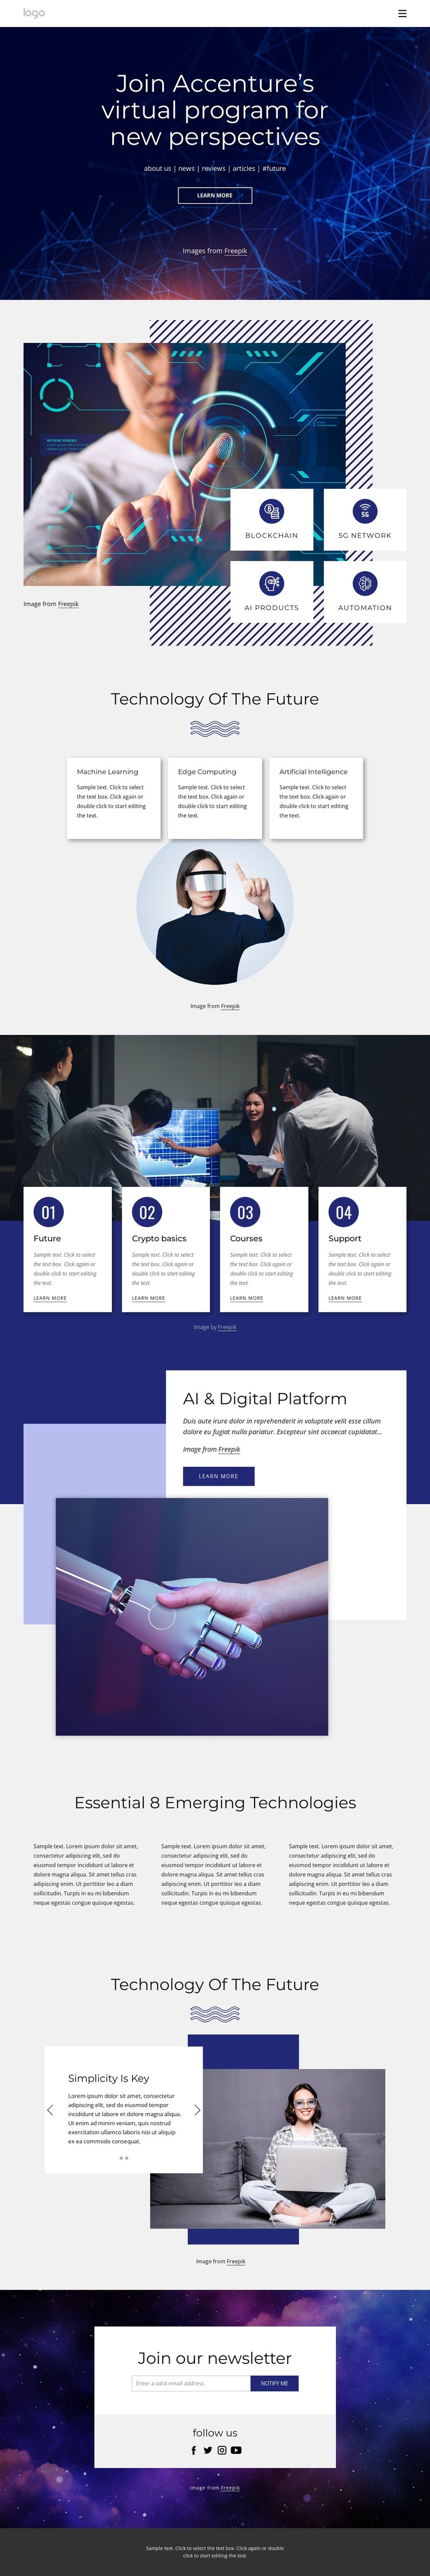 New technology perspectives HTML5 Template